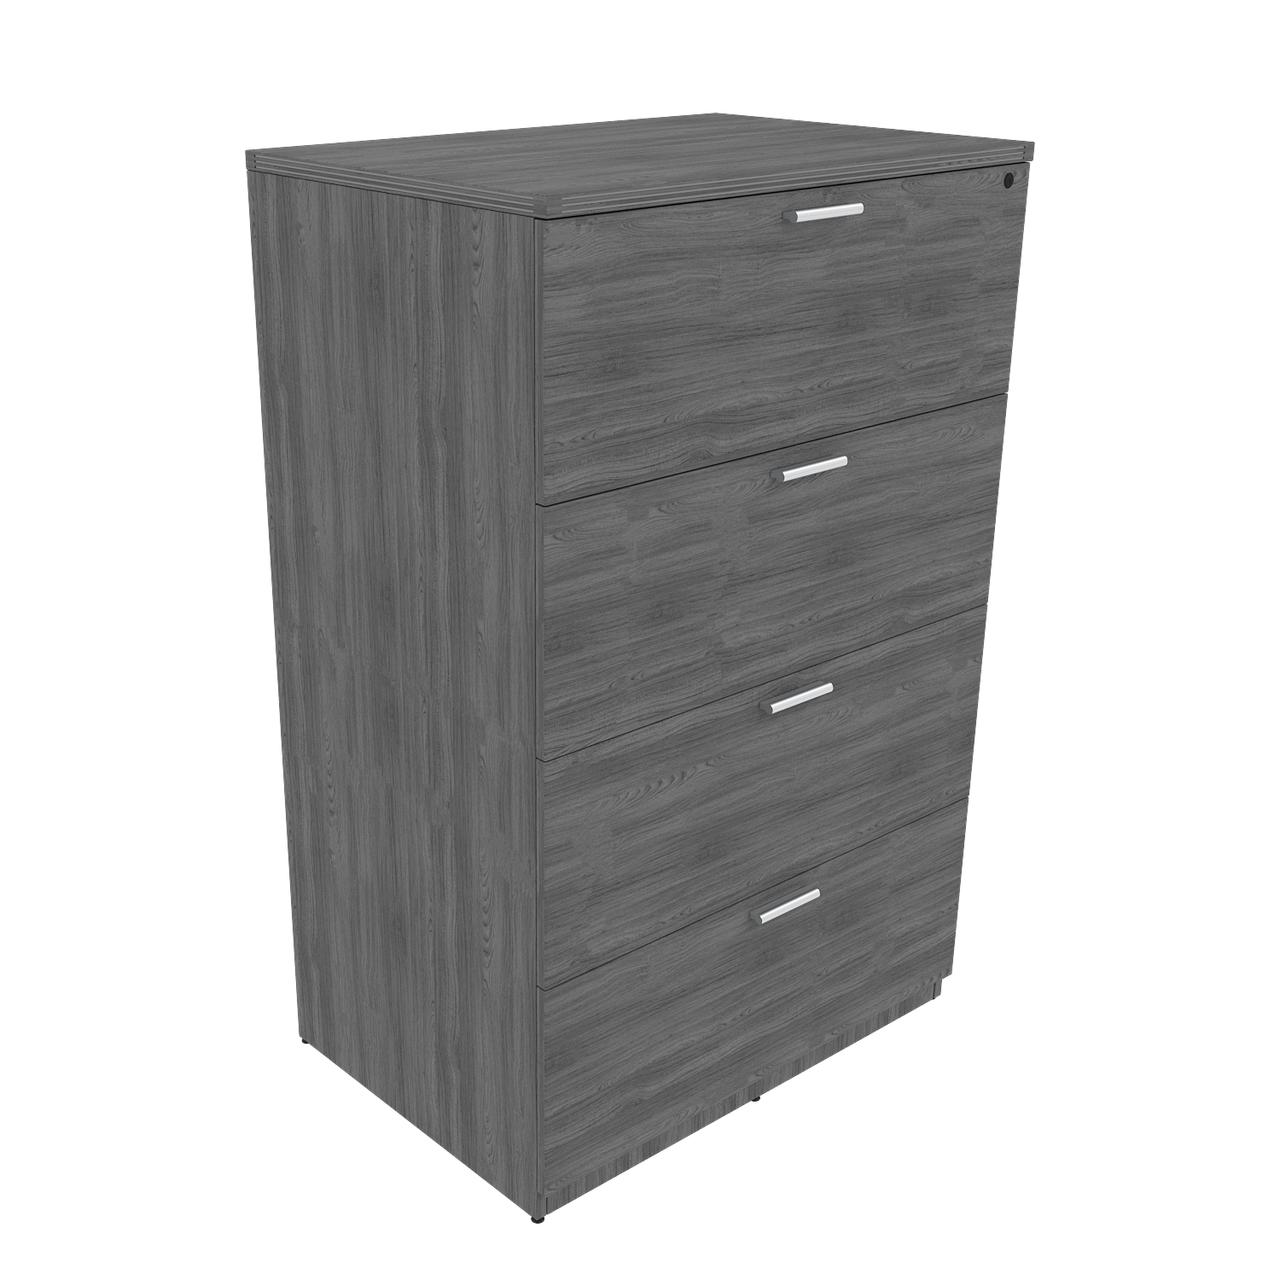  i5 Industries Kai Collection 4 Drawer Lateral File L36DR4 